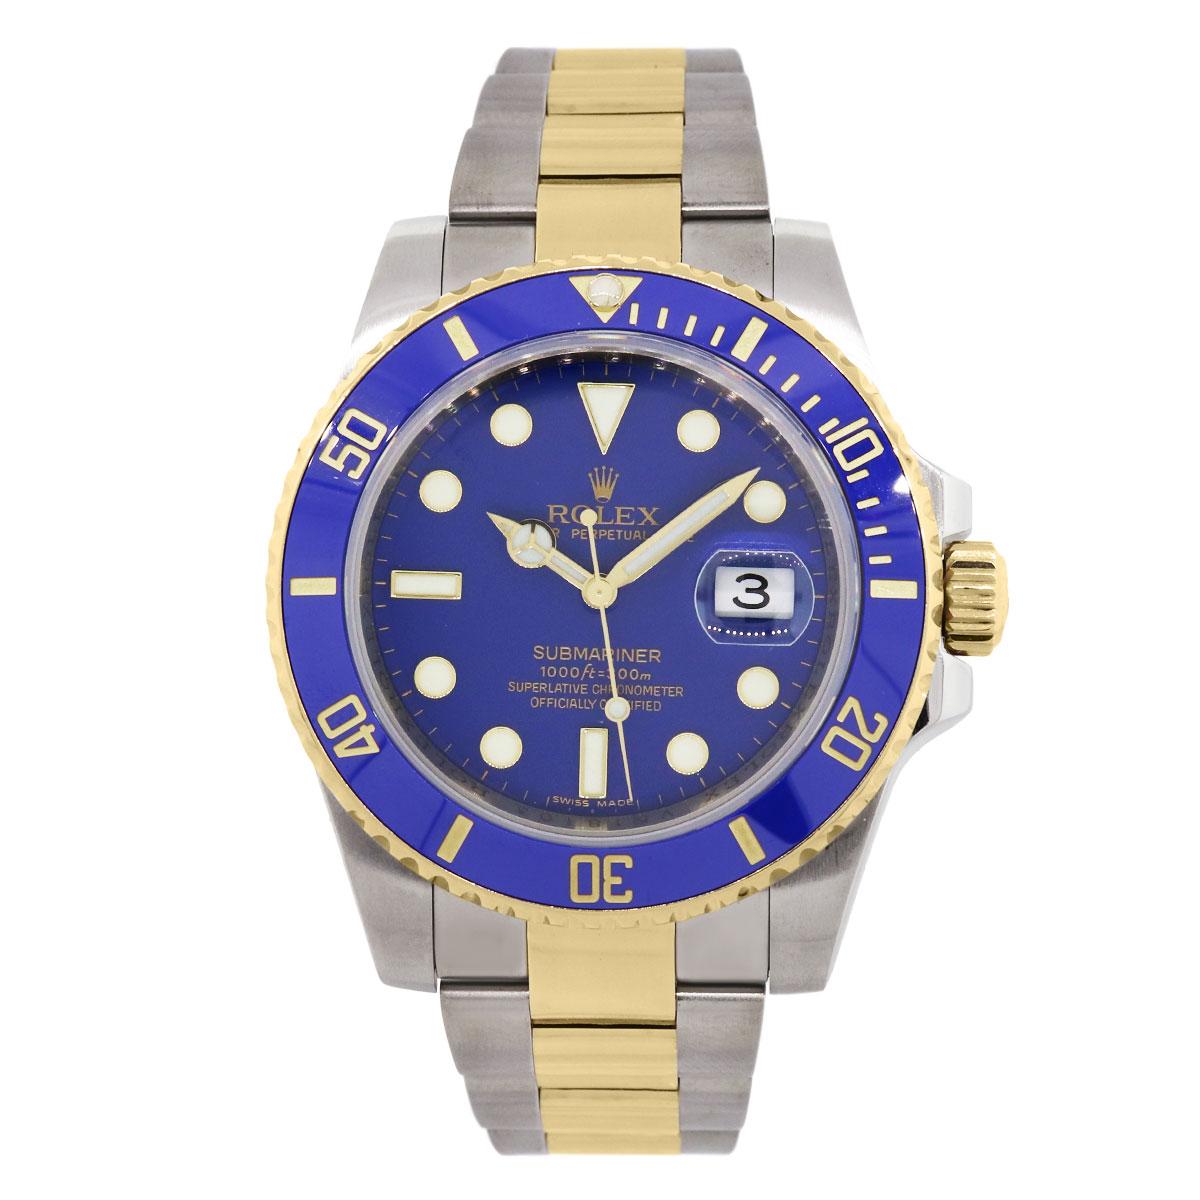 Brand: Rolex
MPN: 116613LB
Model: Submariner
Case Material: Stainless steel
Case Diameter: 40mm
Crystal: Scratch resistant sapphire
Bezel: Blue ceramic unidirectional bezel
Dial: Blue dial
Bracelet: 18k yellow gold and stainless steel oyster